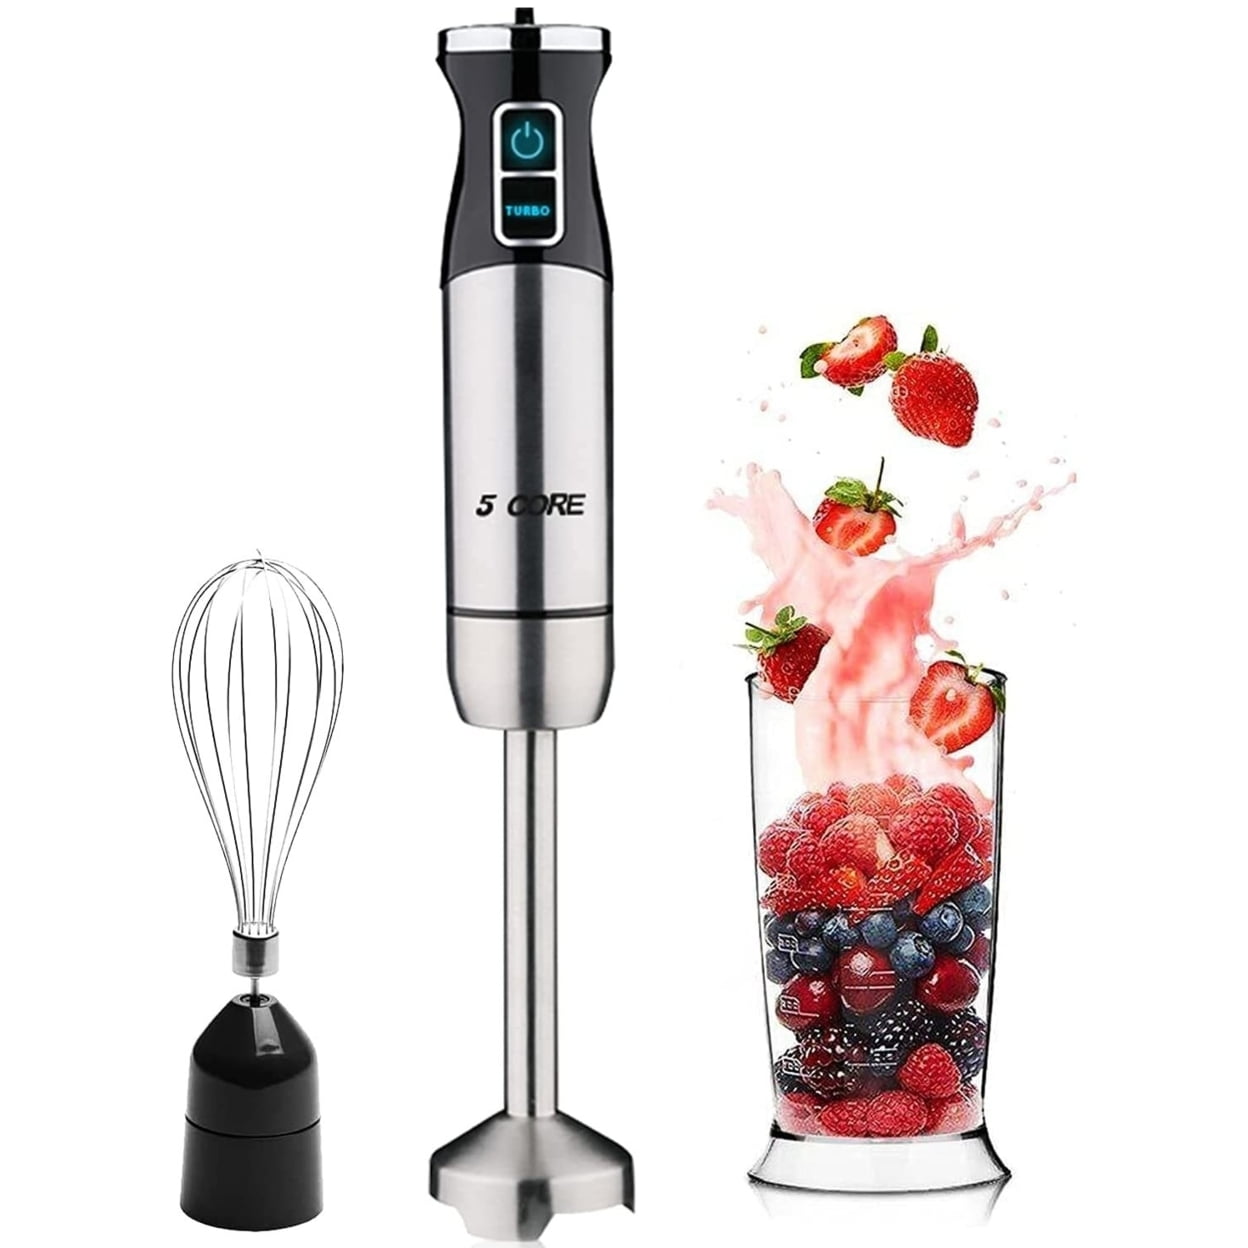 NOZADO 5-in-1 Multi-Function Hand Blender, 1000W Powerful and Sturdy with  12 Speed Control, BPA Free Containers, Easy to Clean and Safe